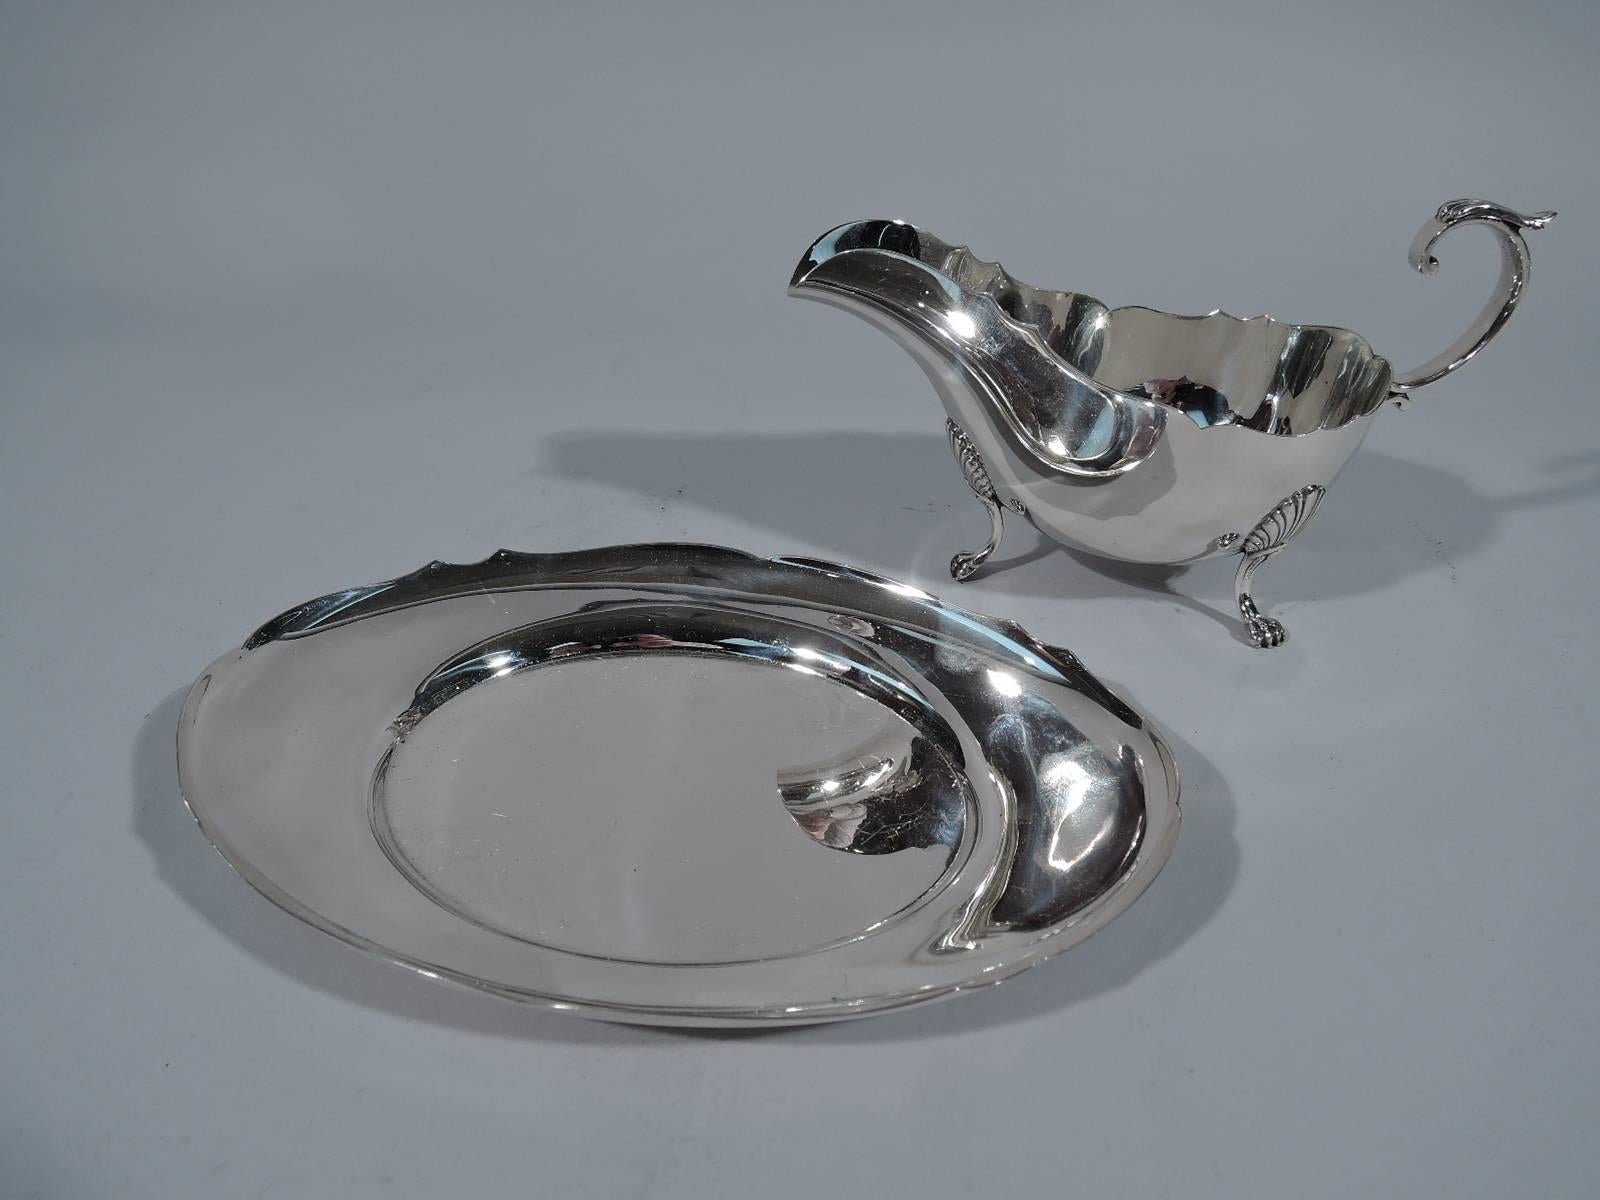 Sterling silver gravy boat on stand in Standish pattern. Made by Gorham in Providence, circa 1920. Boat has scrolled rim, flying double-scroll handle with leaf cap and three paw supports with scallop shell mounts. Stand has oval well and scrolled